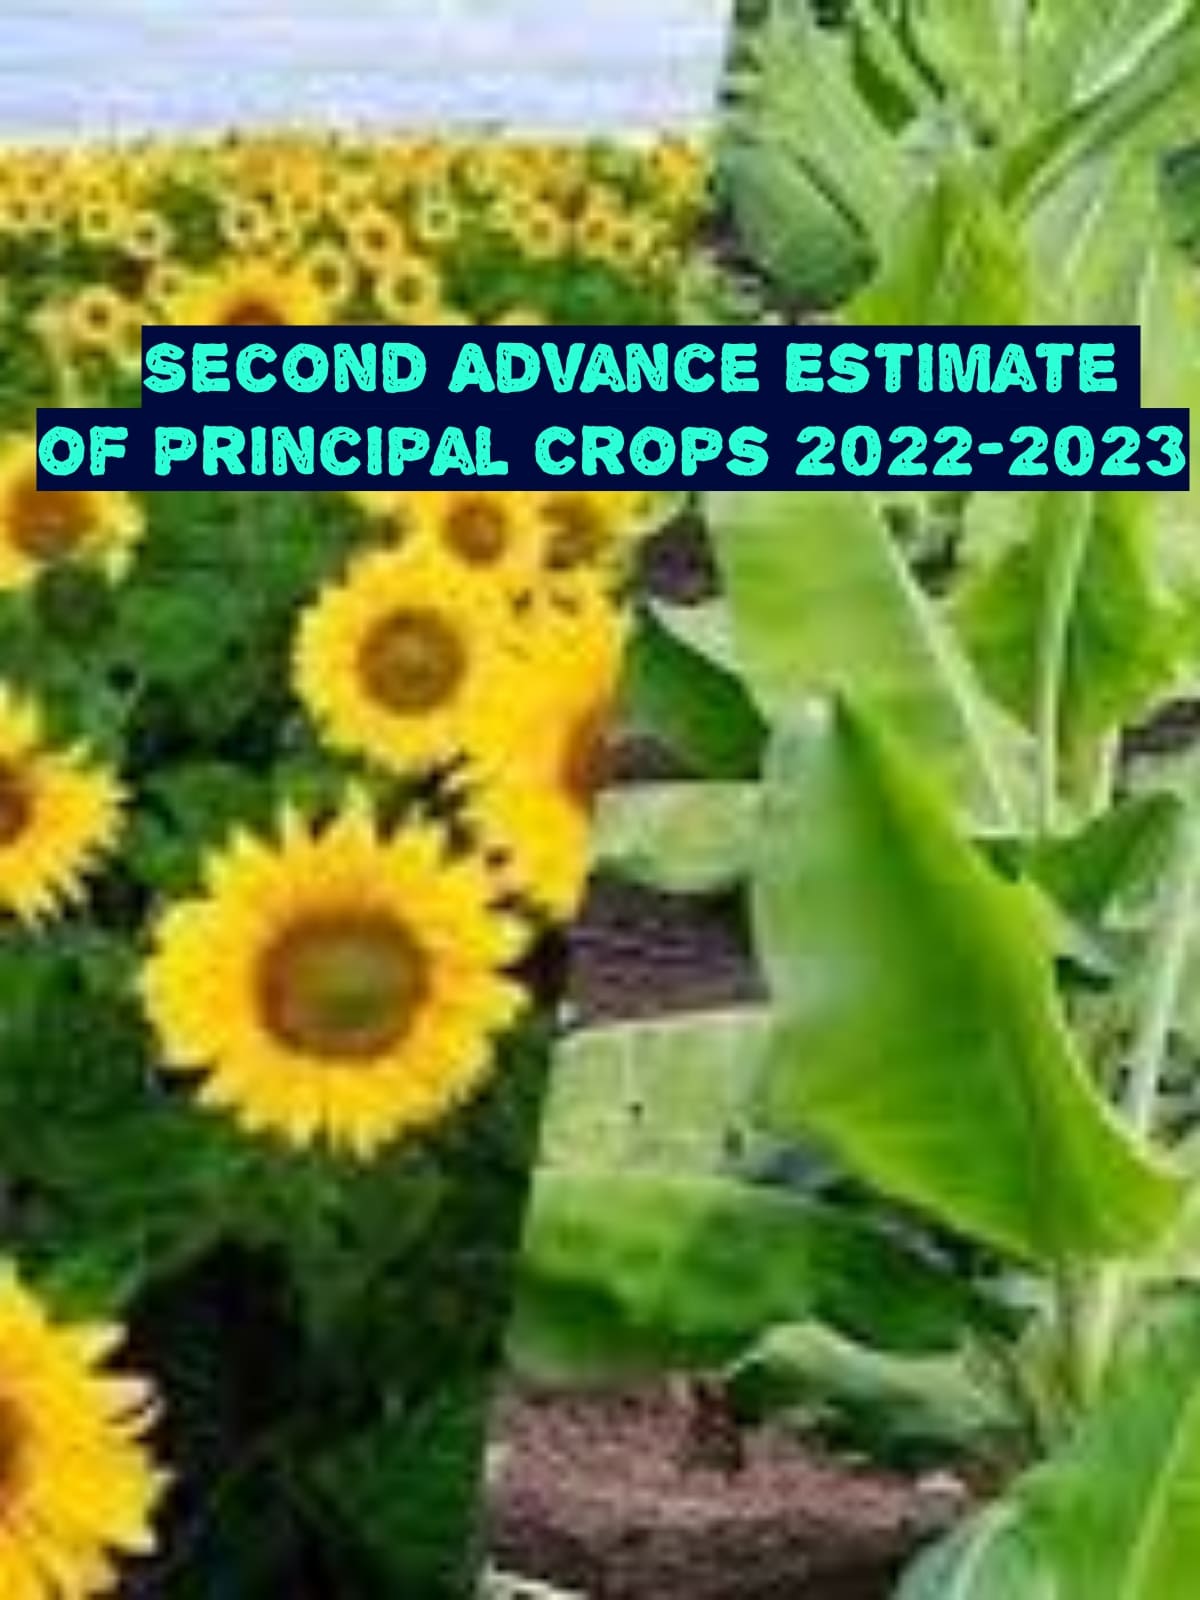 Second Advance estimate of area and production of crops 2022-23